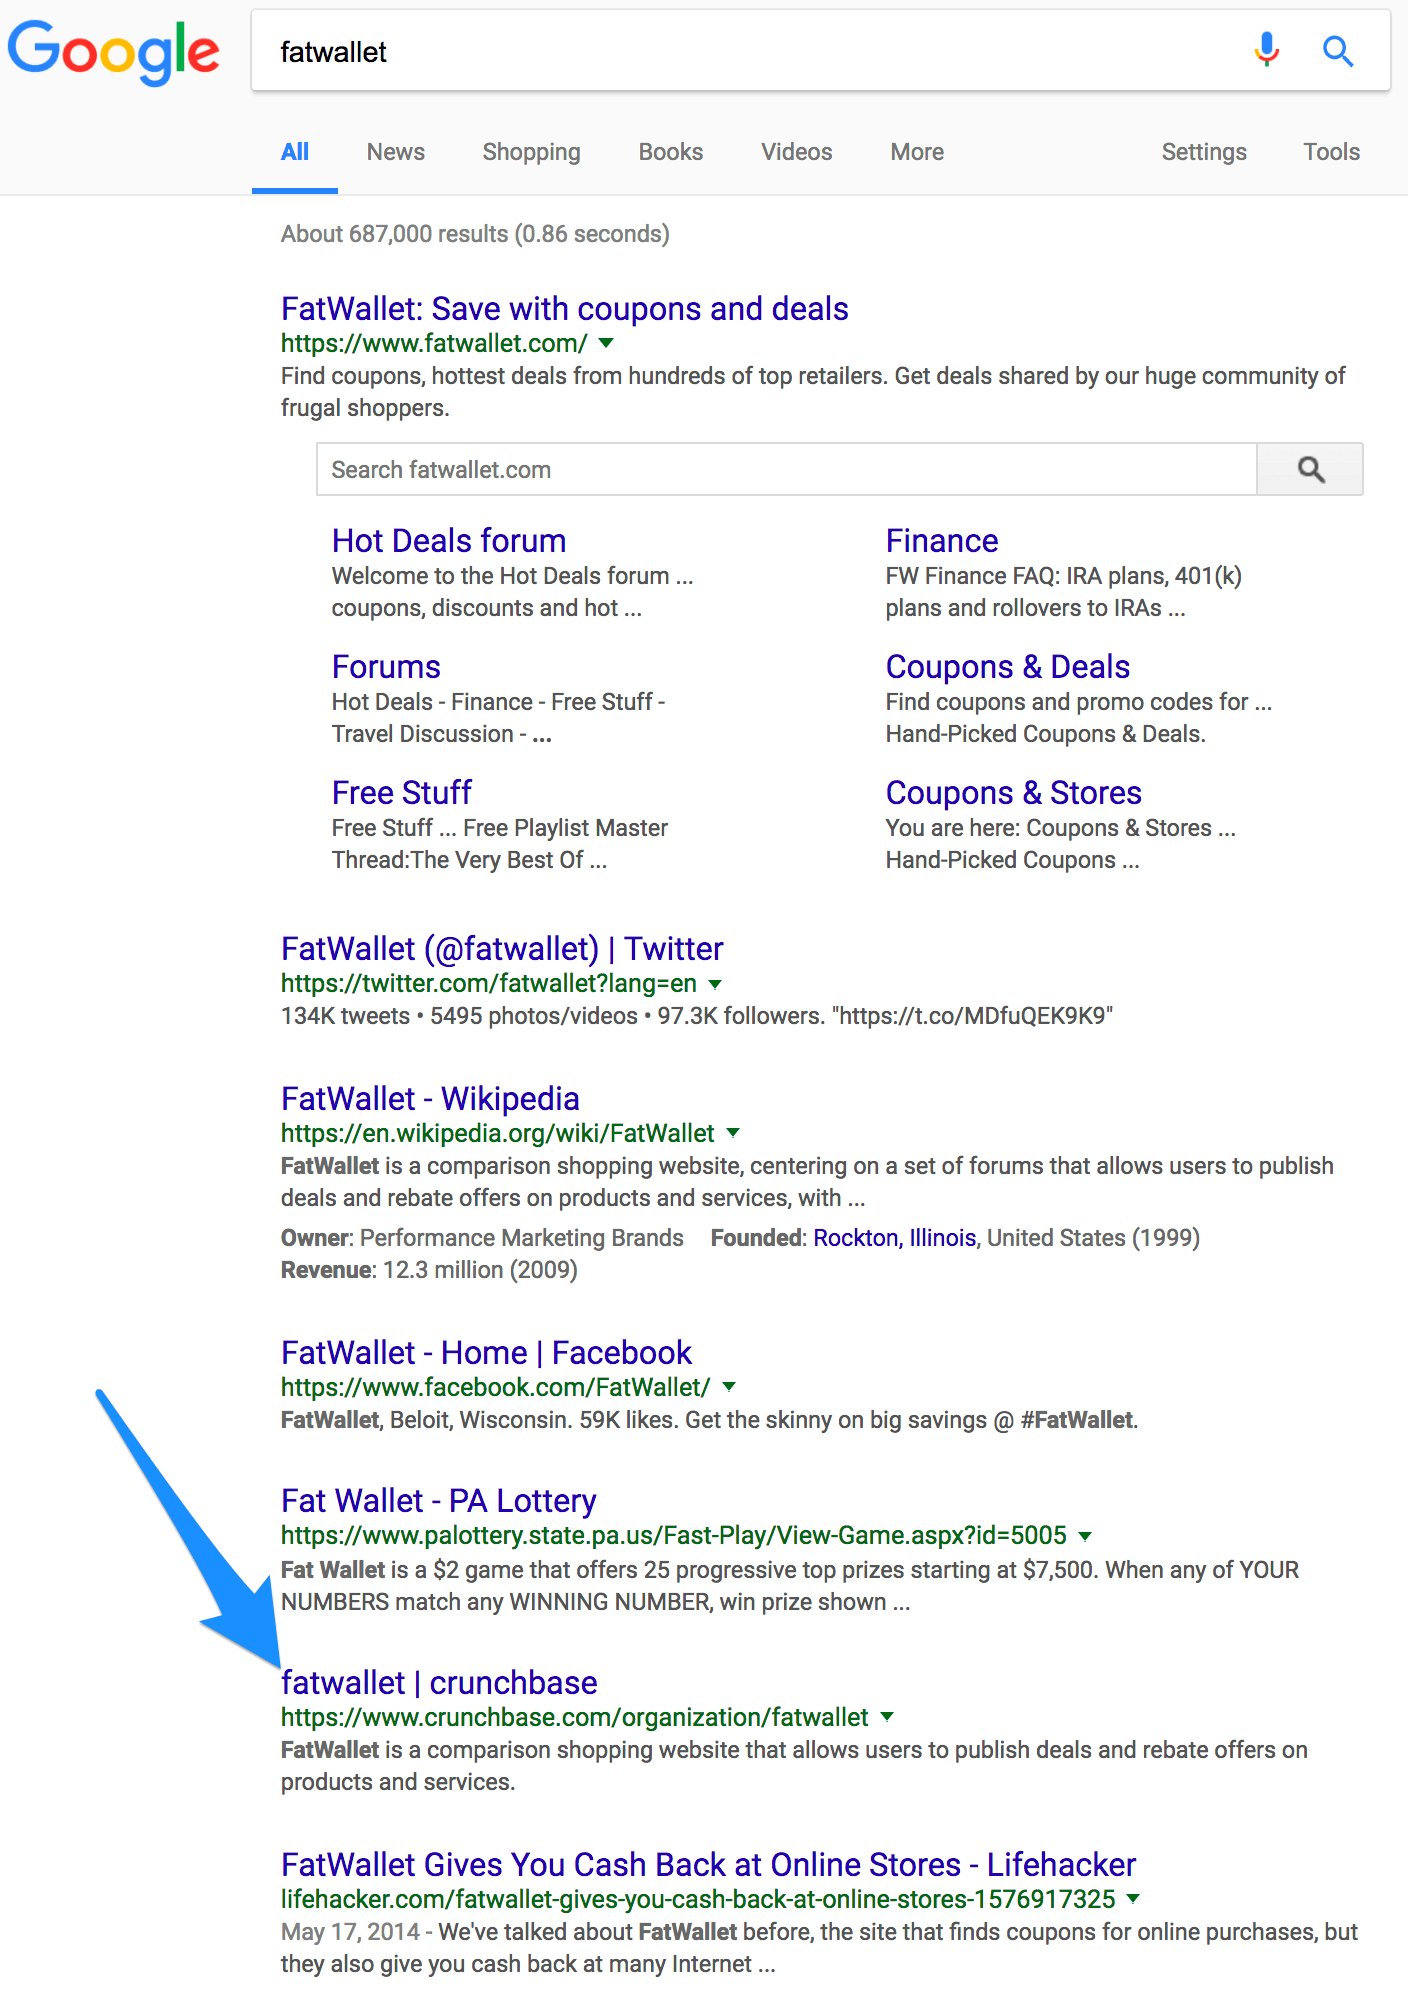 6 web properties you can use to protect your branded search results (with real examples)